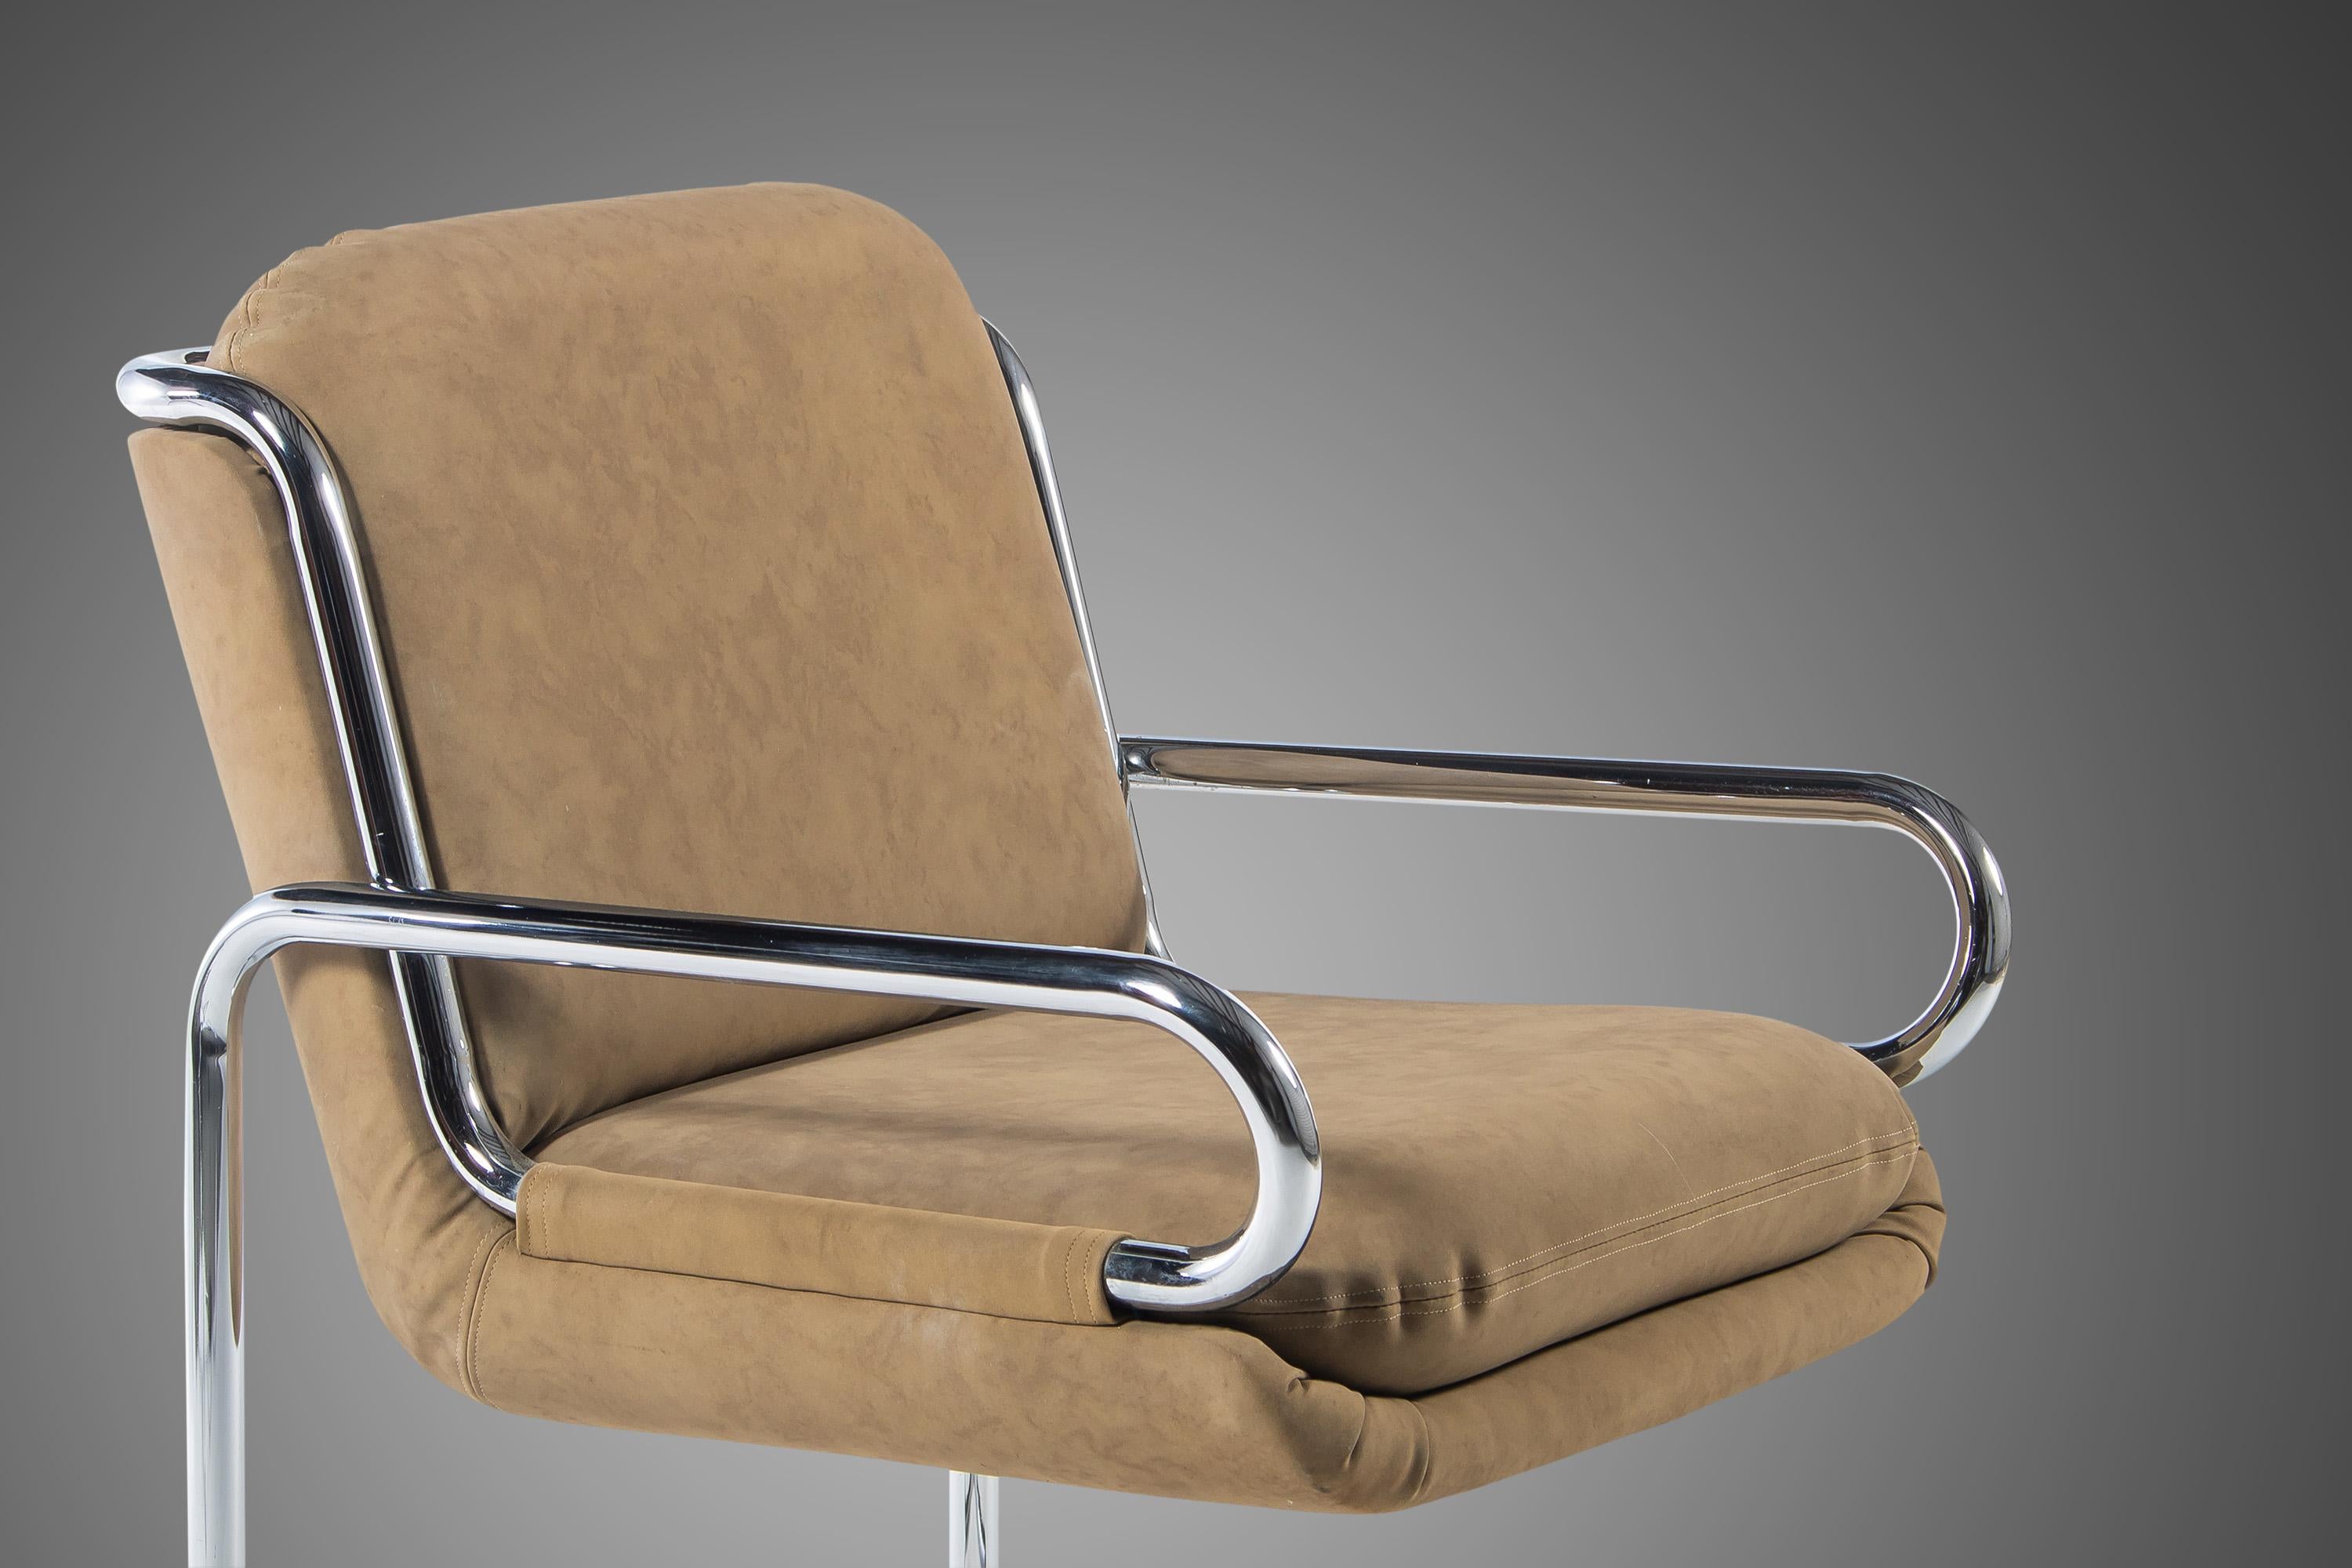 Late 20th Century Pair of Lounge Chairs Tubular Chrome Lounge Chairs by Dunbar Dux, c. 1970s For Sale